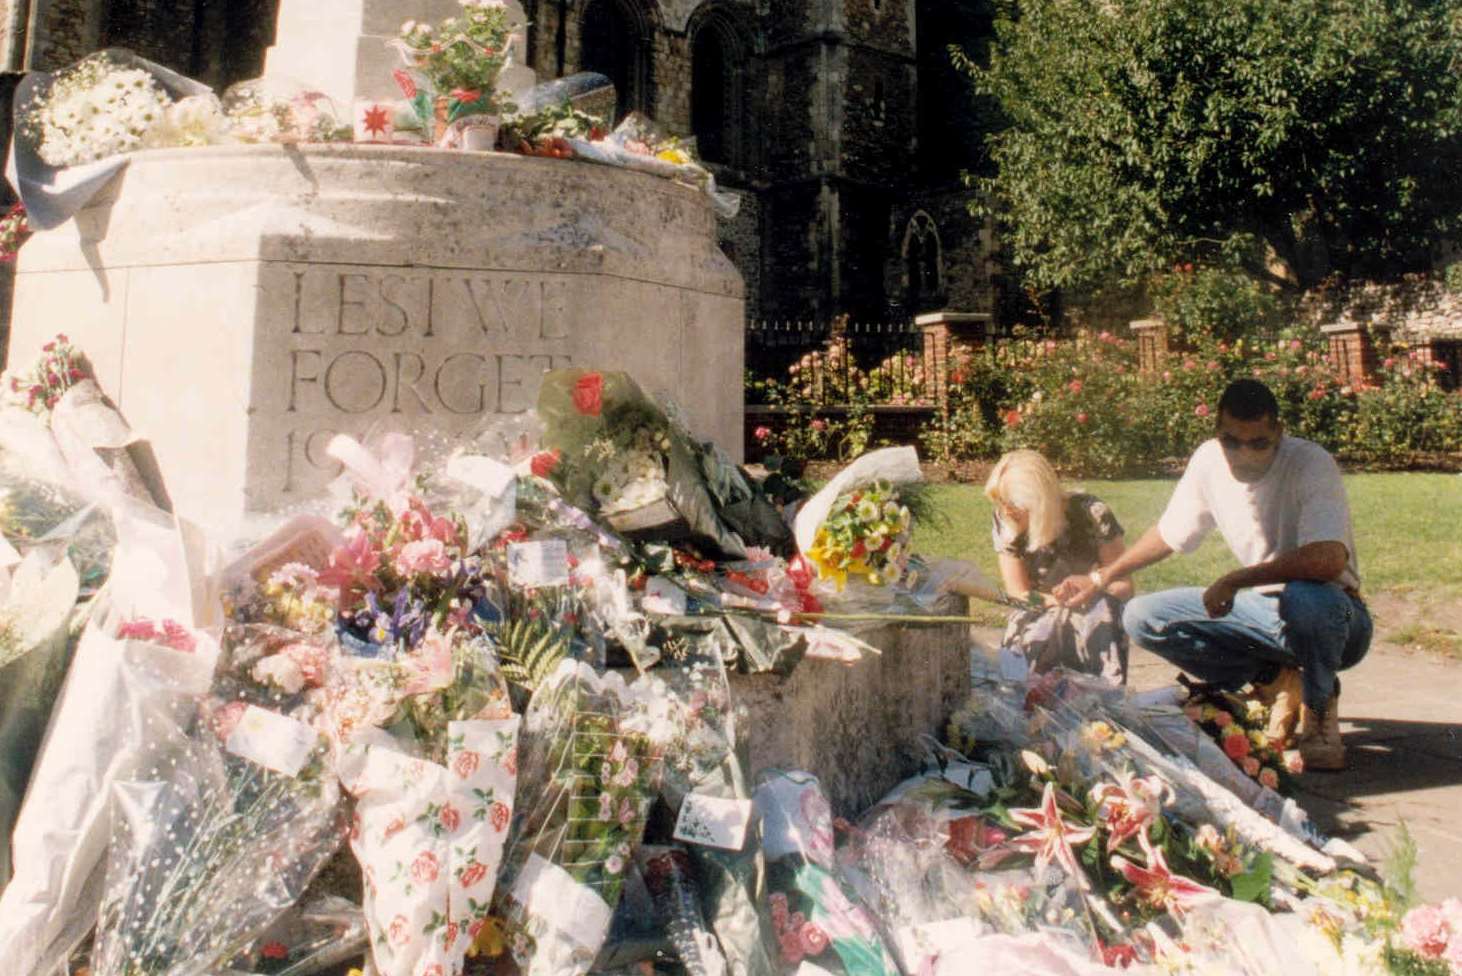 Tributes left to remember Princess Diana at Rochester Cathedral